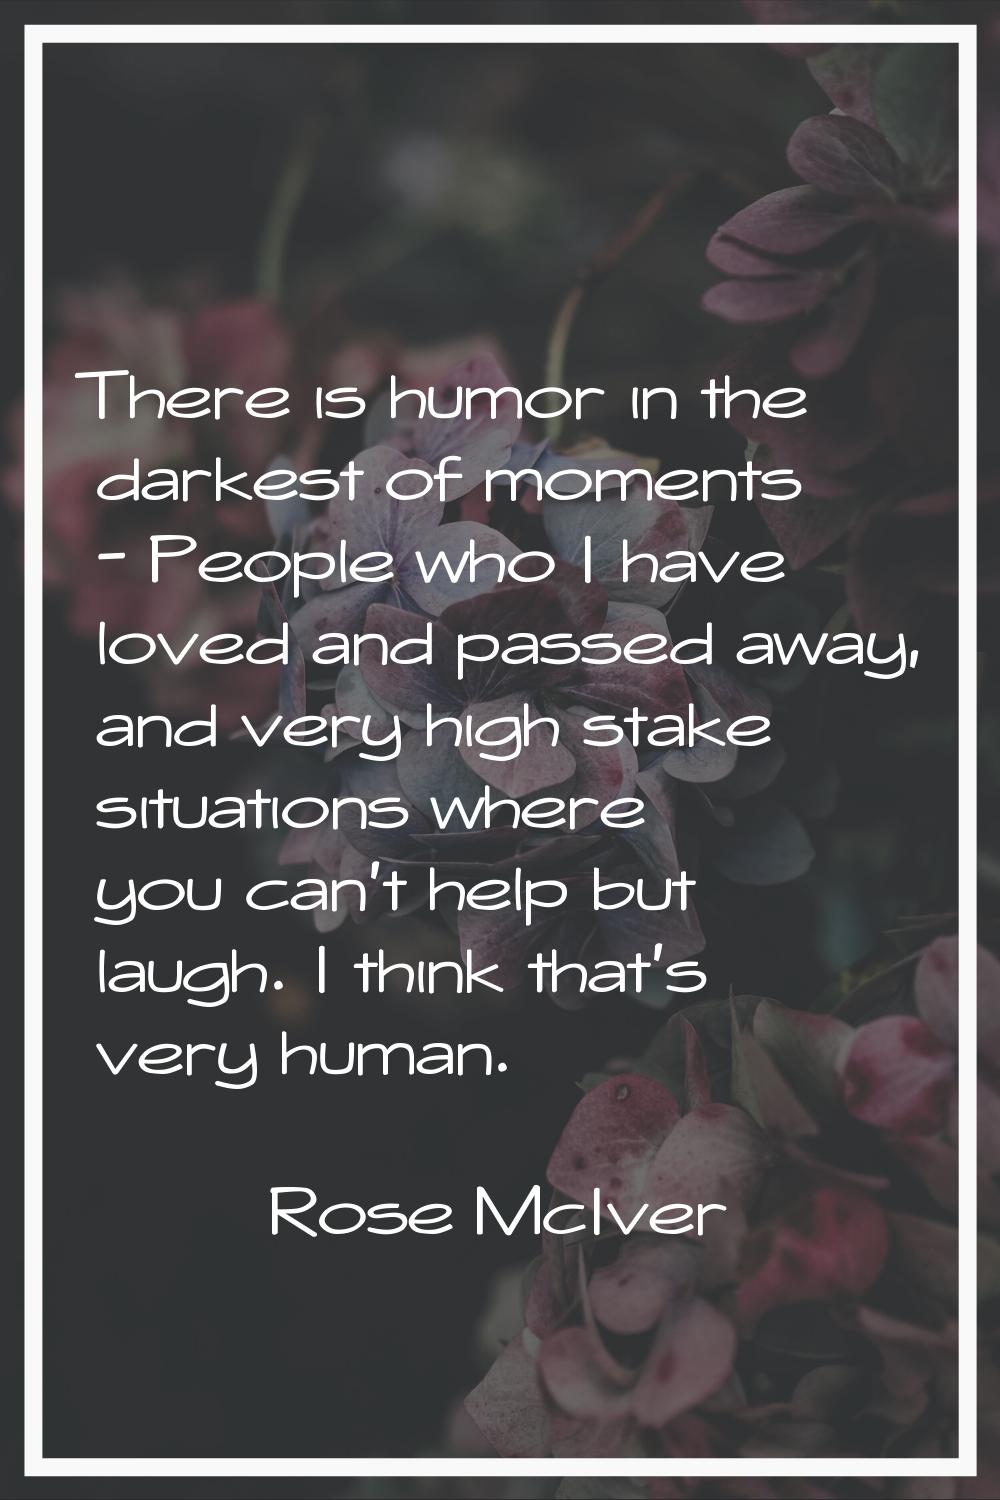 There is humor in the darkest of moments - People who I have loved and passed away, and very high s